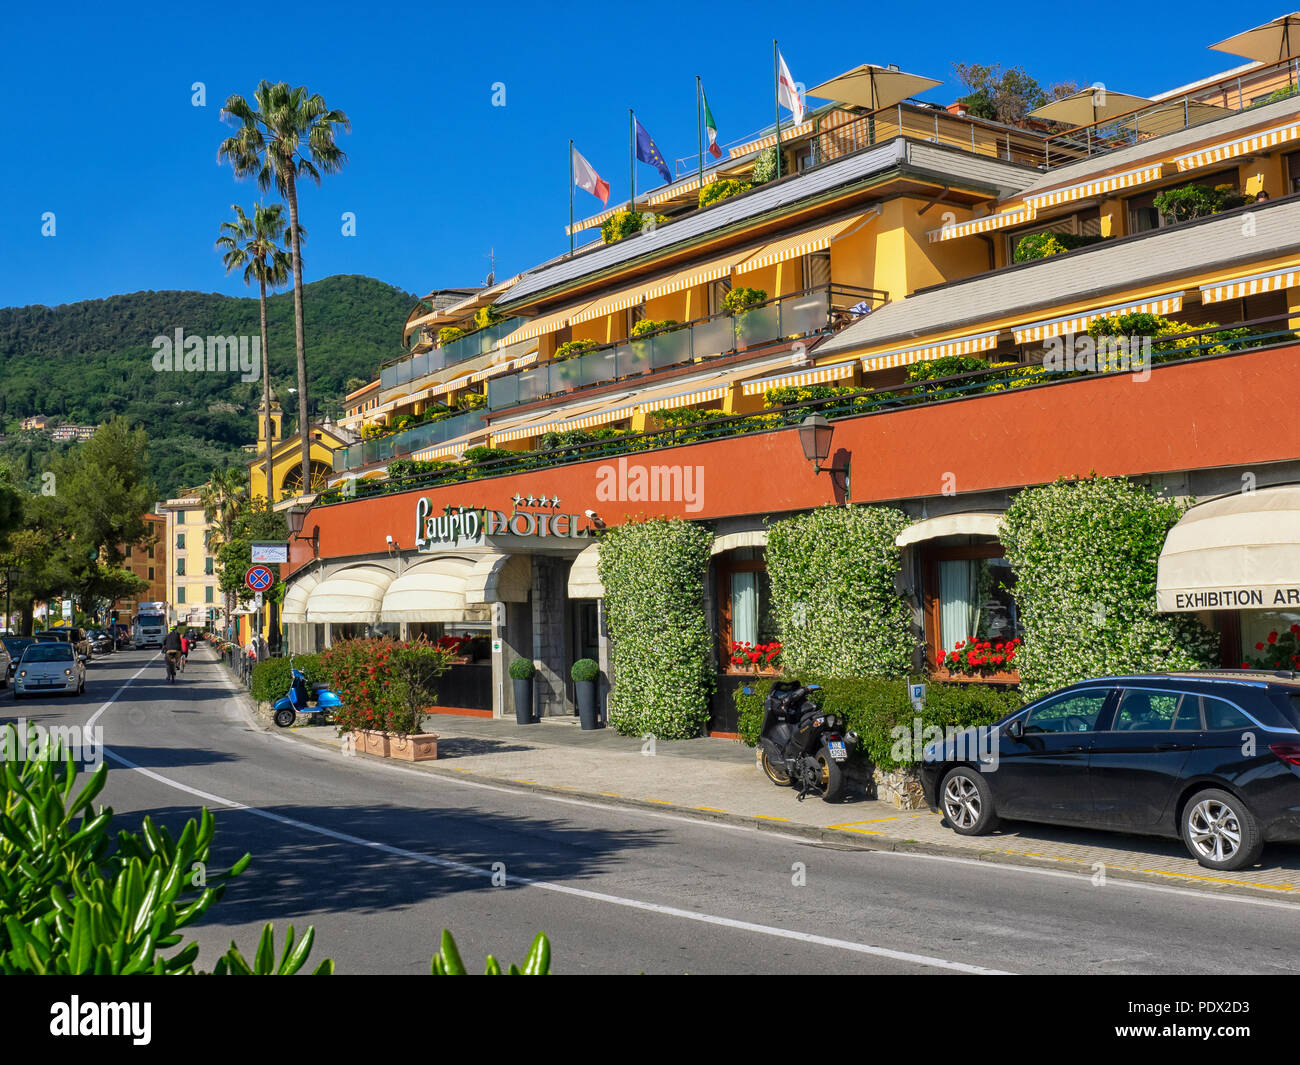 SANTA MARGHERITA LIGURE, ITALY - MAY 19, 2018:  View of the Hotel Laurin Stock Photo